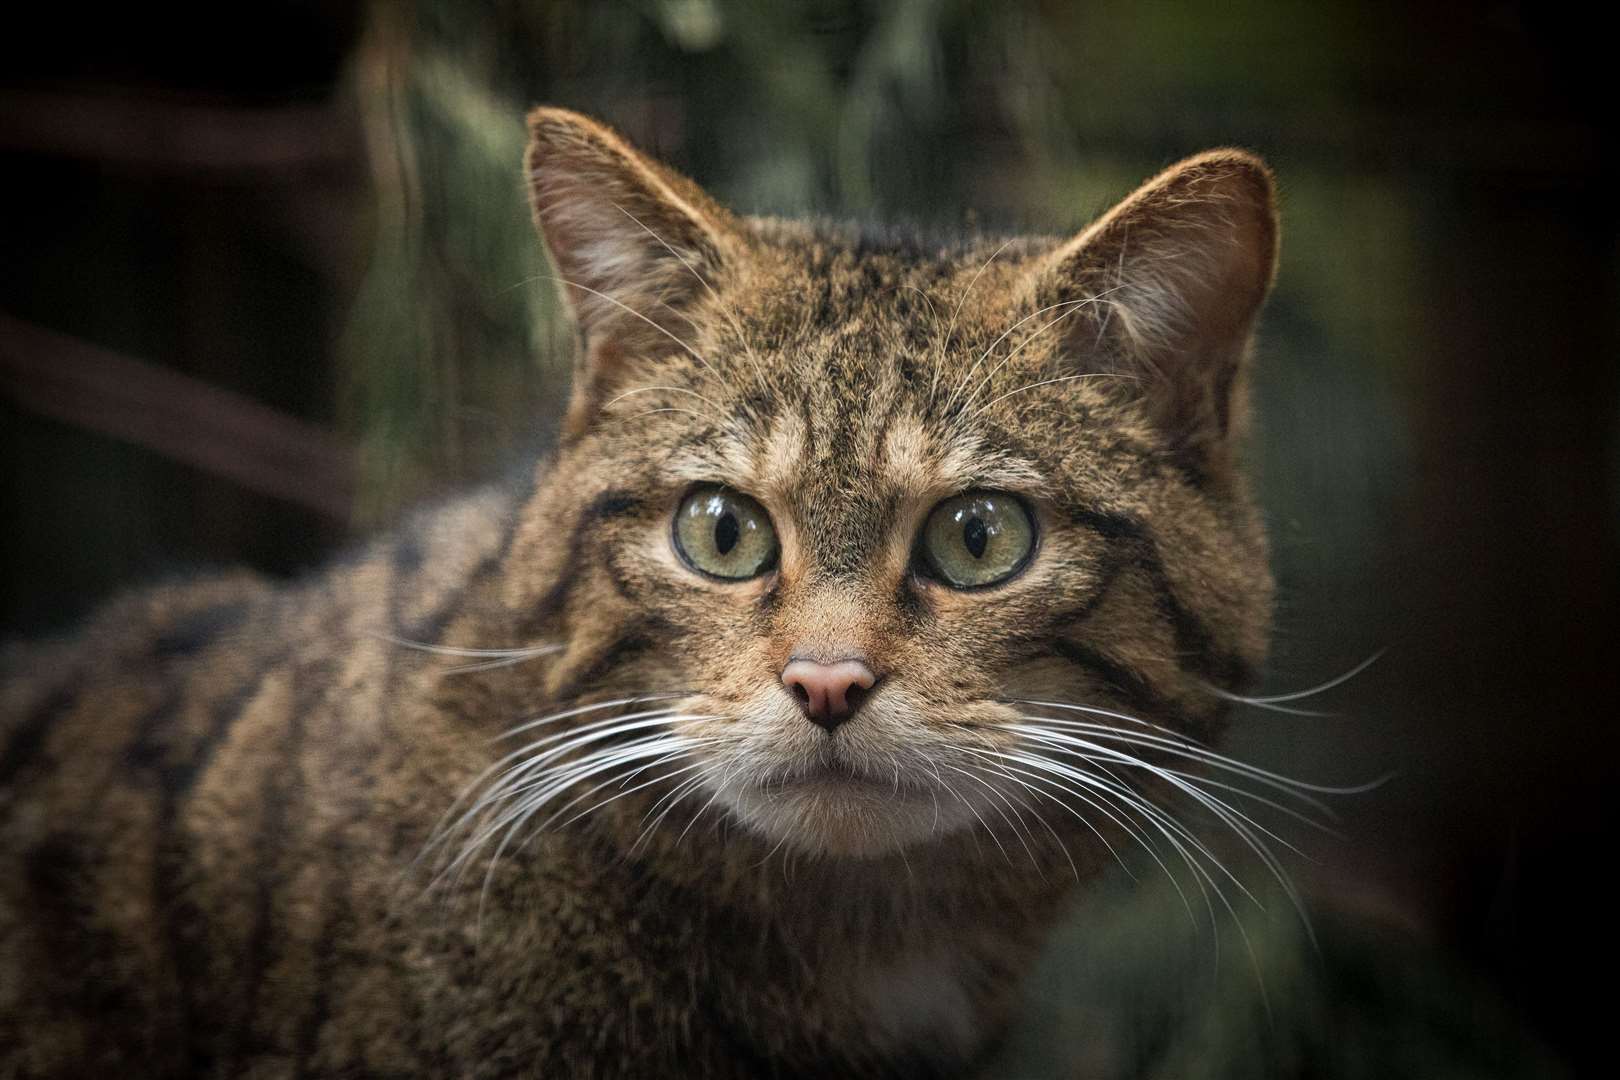 There could be as few as 200 pure Scottish wildcats remaining in the wild with hybridisation with domestic cats the main cause of their decline.